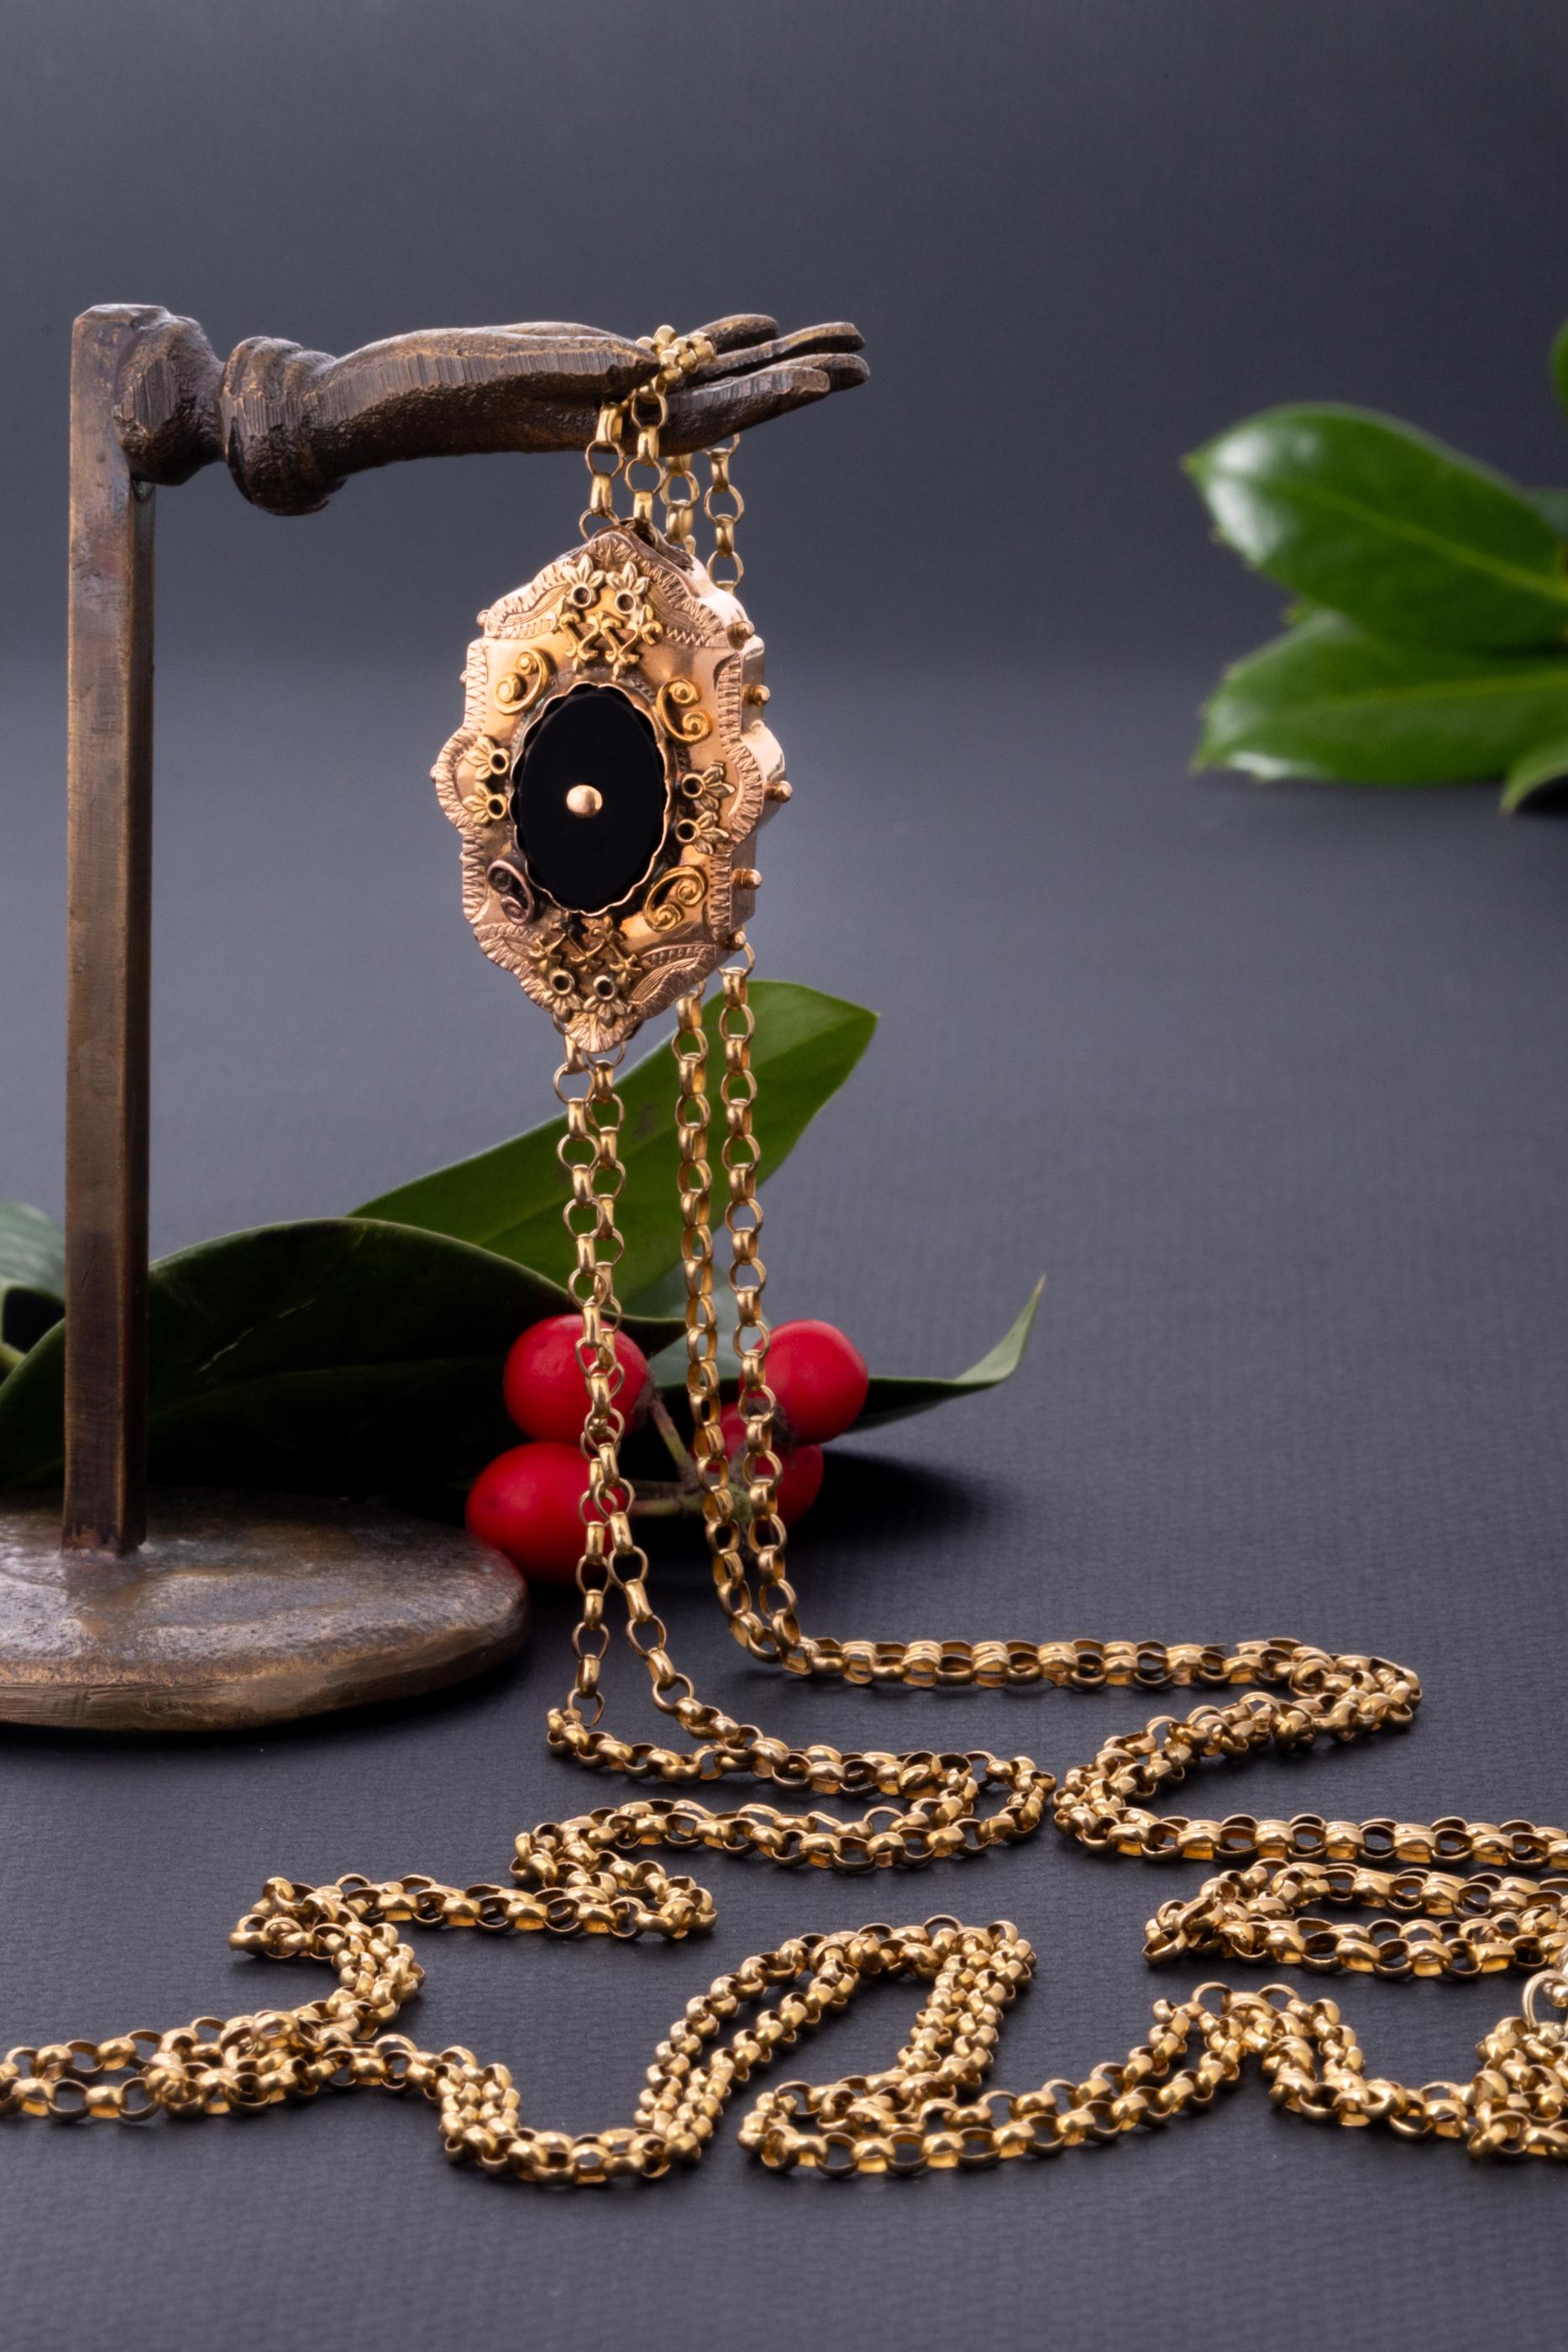 An extremely rare and highly collectable VERY LONG gold chain necklace in solid 14ct yellow gold.

The chain is preserved in a superb state and has two original locks. A chunky slide lock is decorated with two onyx plates on both sides. The onyx has